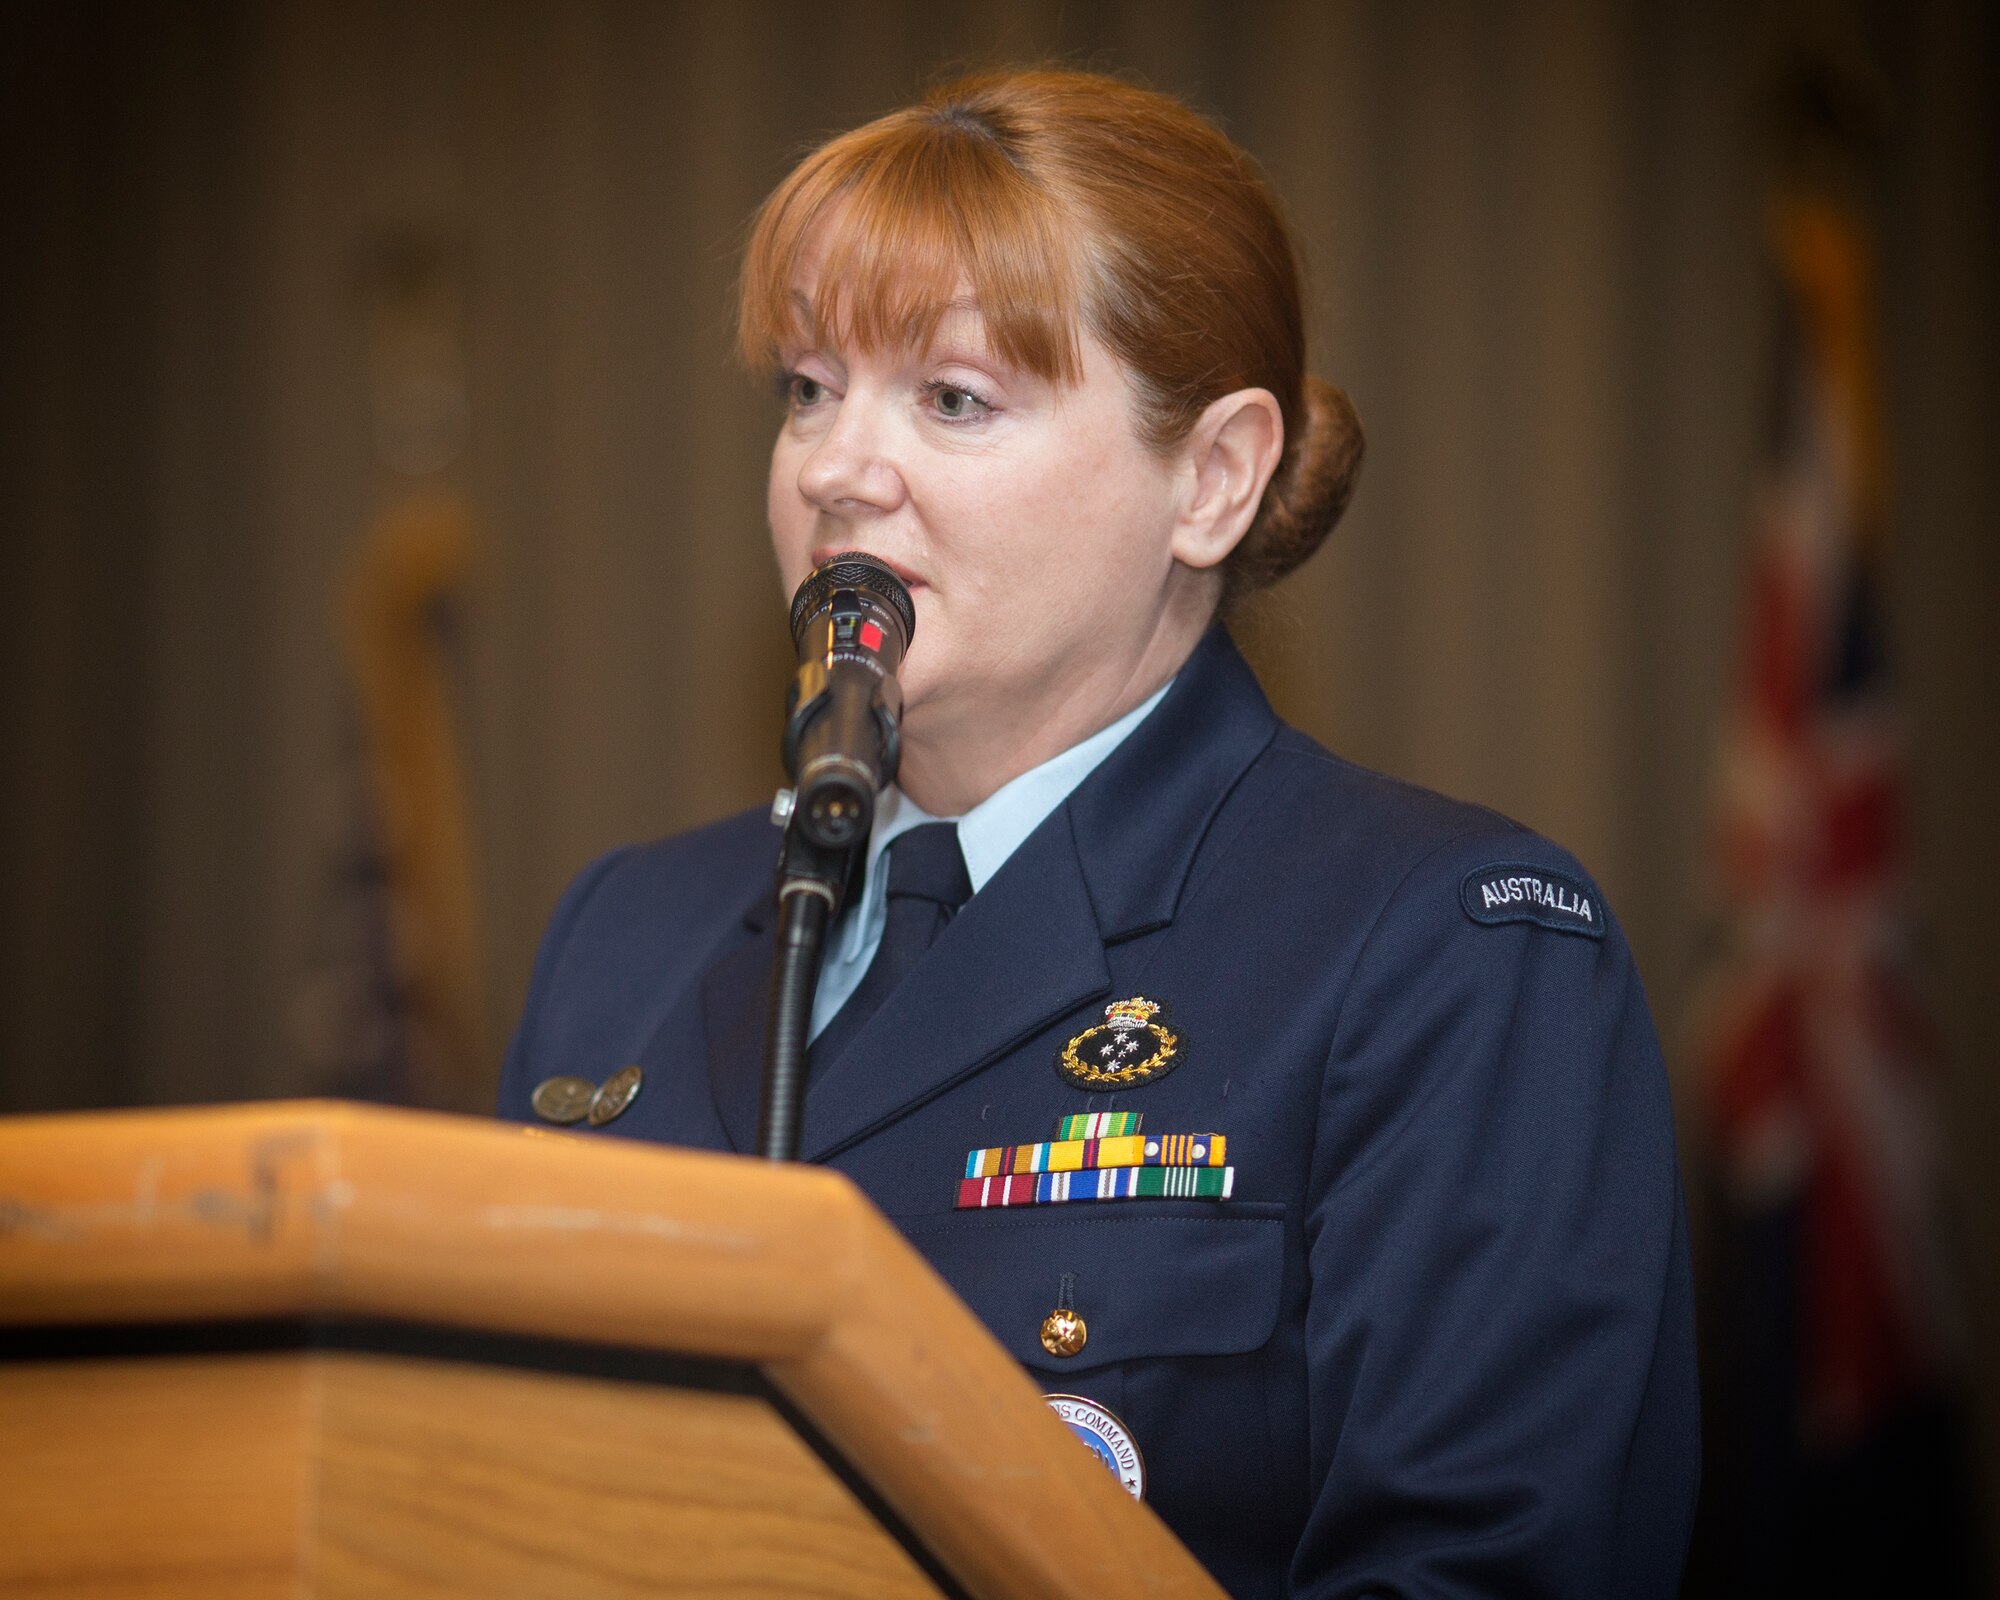 Royal Australian Air Force Group Captain Barbara Courtney, United Nations Command (Rear) commander, gives her final speech as commander during the UNC (Rear) change of command ceremony at Yokota Air Base, Japan, Jan. 26, 2016. As the United Nations Command’s principal representative in Japan, the UNC-R maintains the status of forces agreement regarding United Nations Forces in Japan during armistice conditions. (U.S. Air Force photo by Osakabe Yasuo/Released)